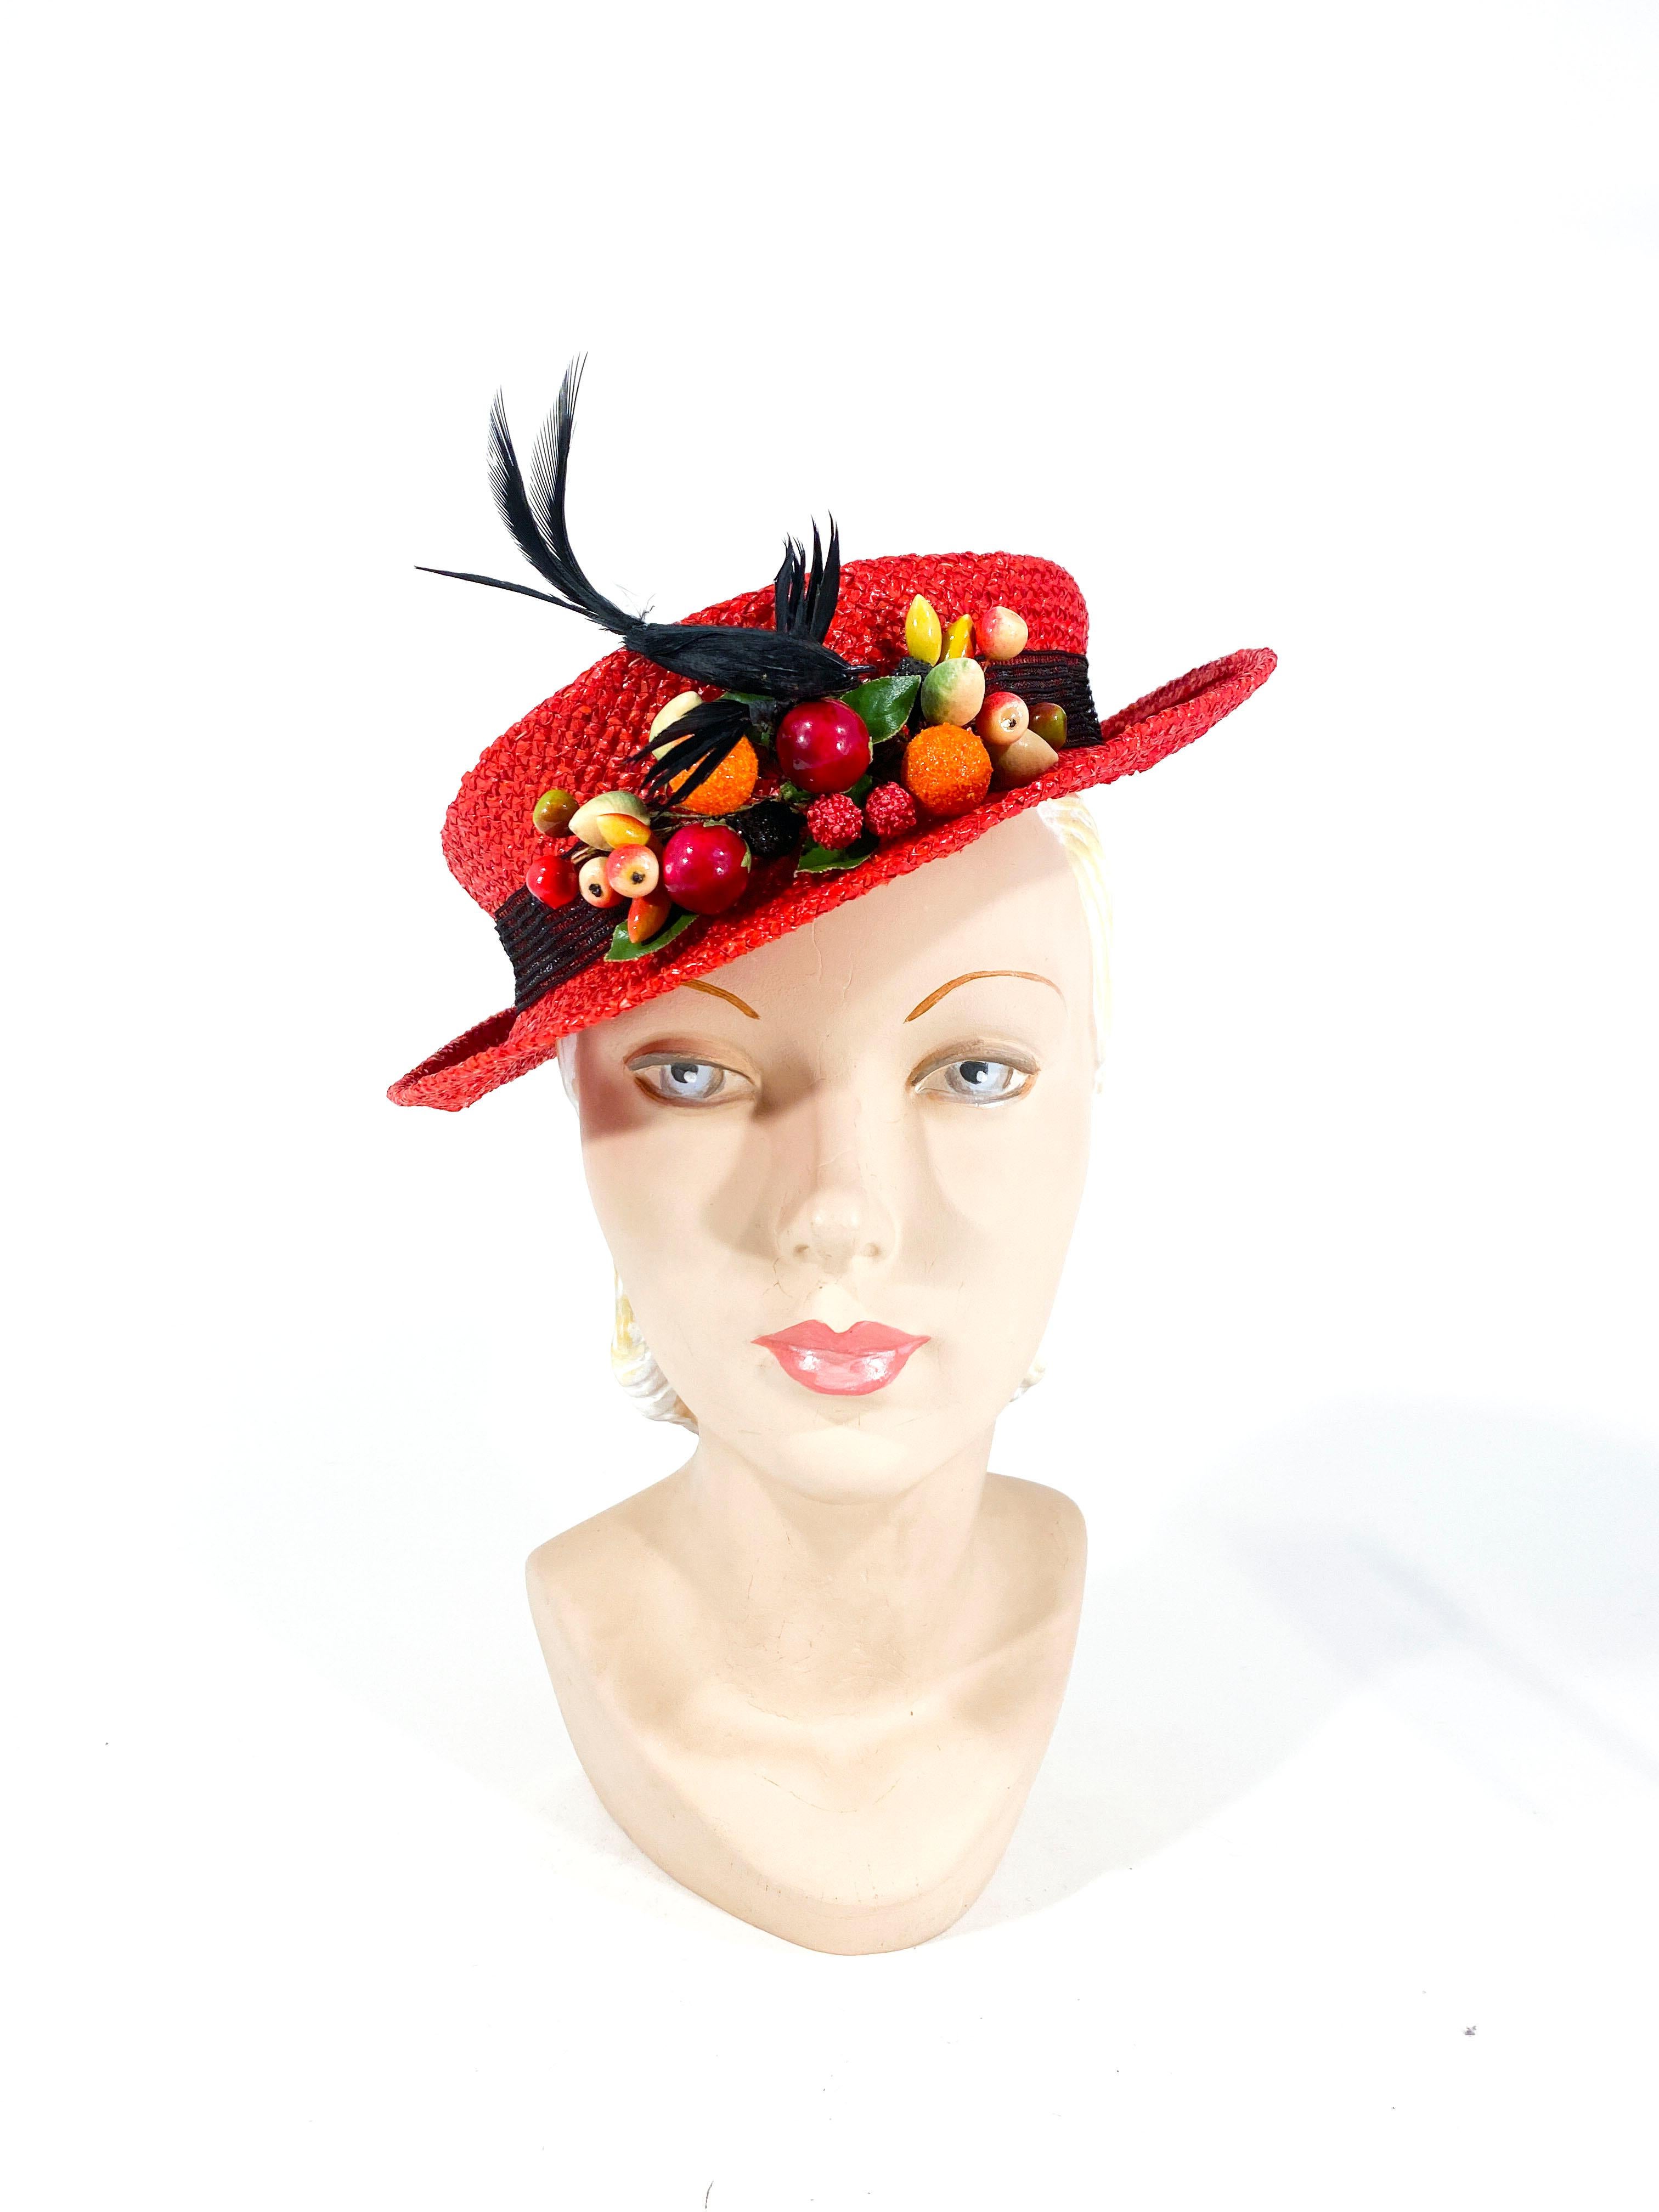 Late 1930's to early 1940's red coated woven straw perch hat decorated with a black mesh band, handcrafted fruit and a feathered sculpted bird.